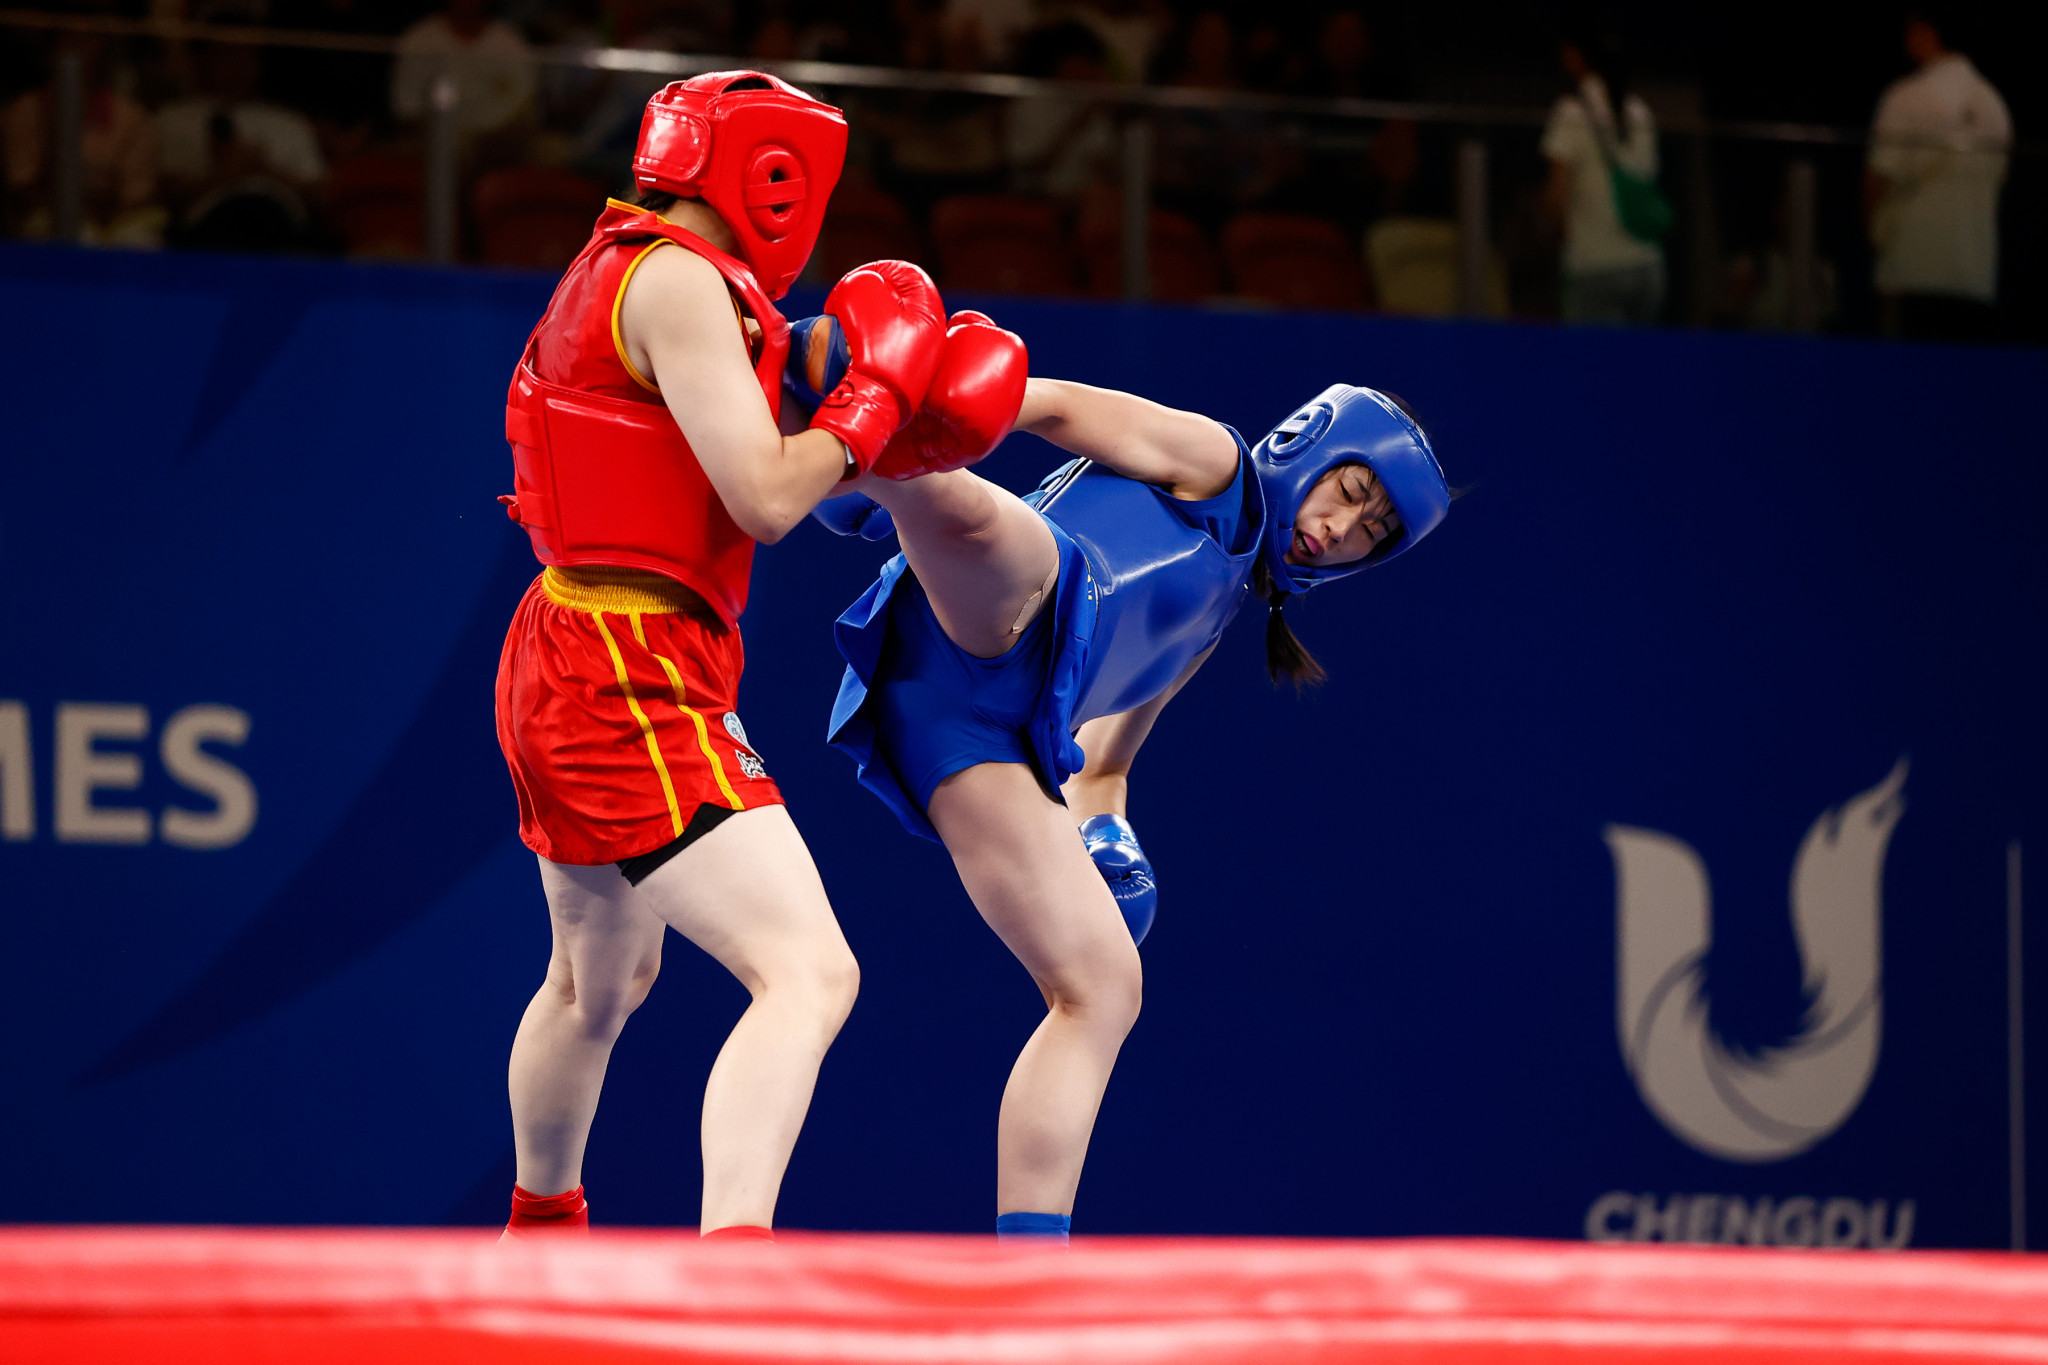 China excel on final day of wushu events at Chengdu 2021